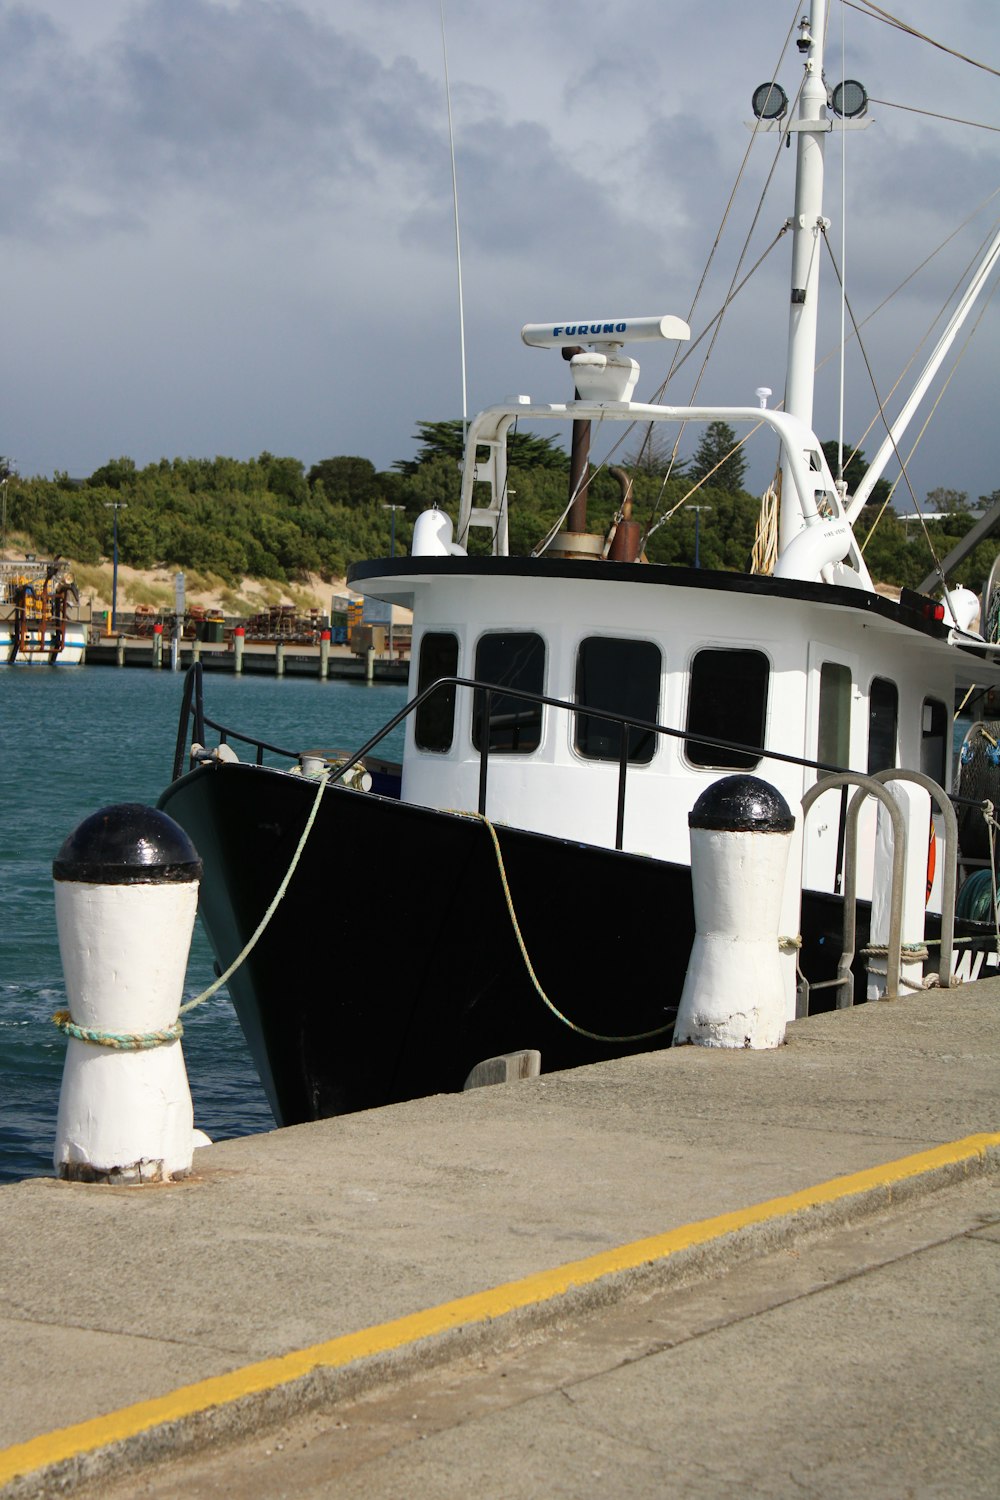 black and white boat on sea dock during daytime